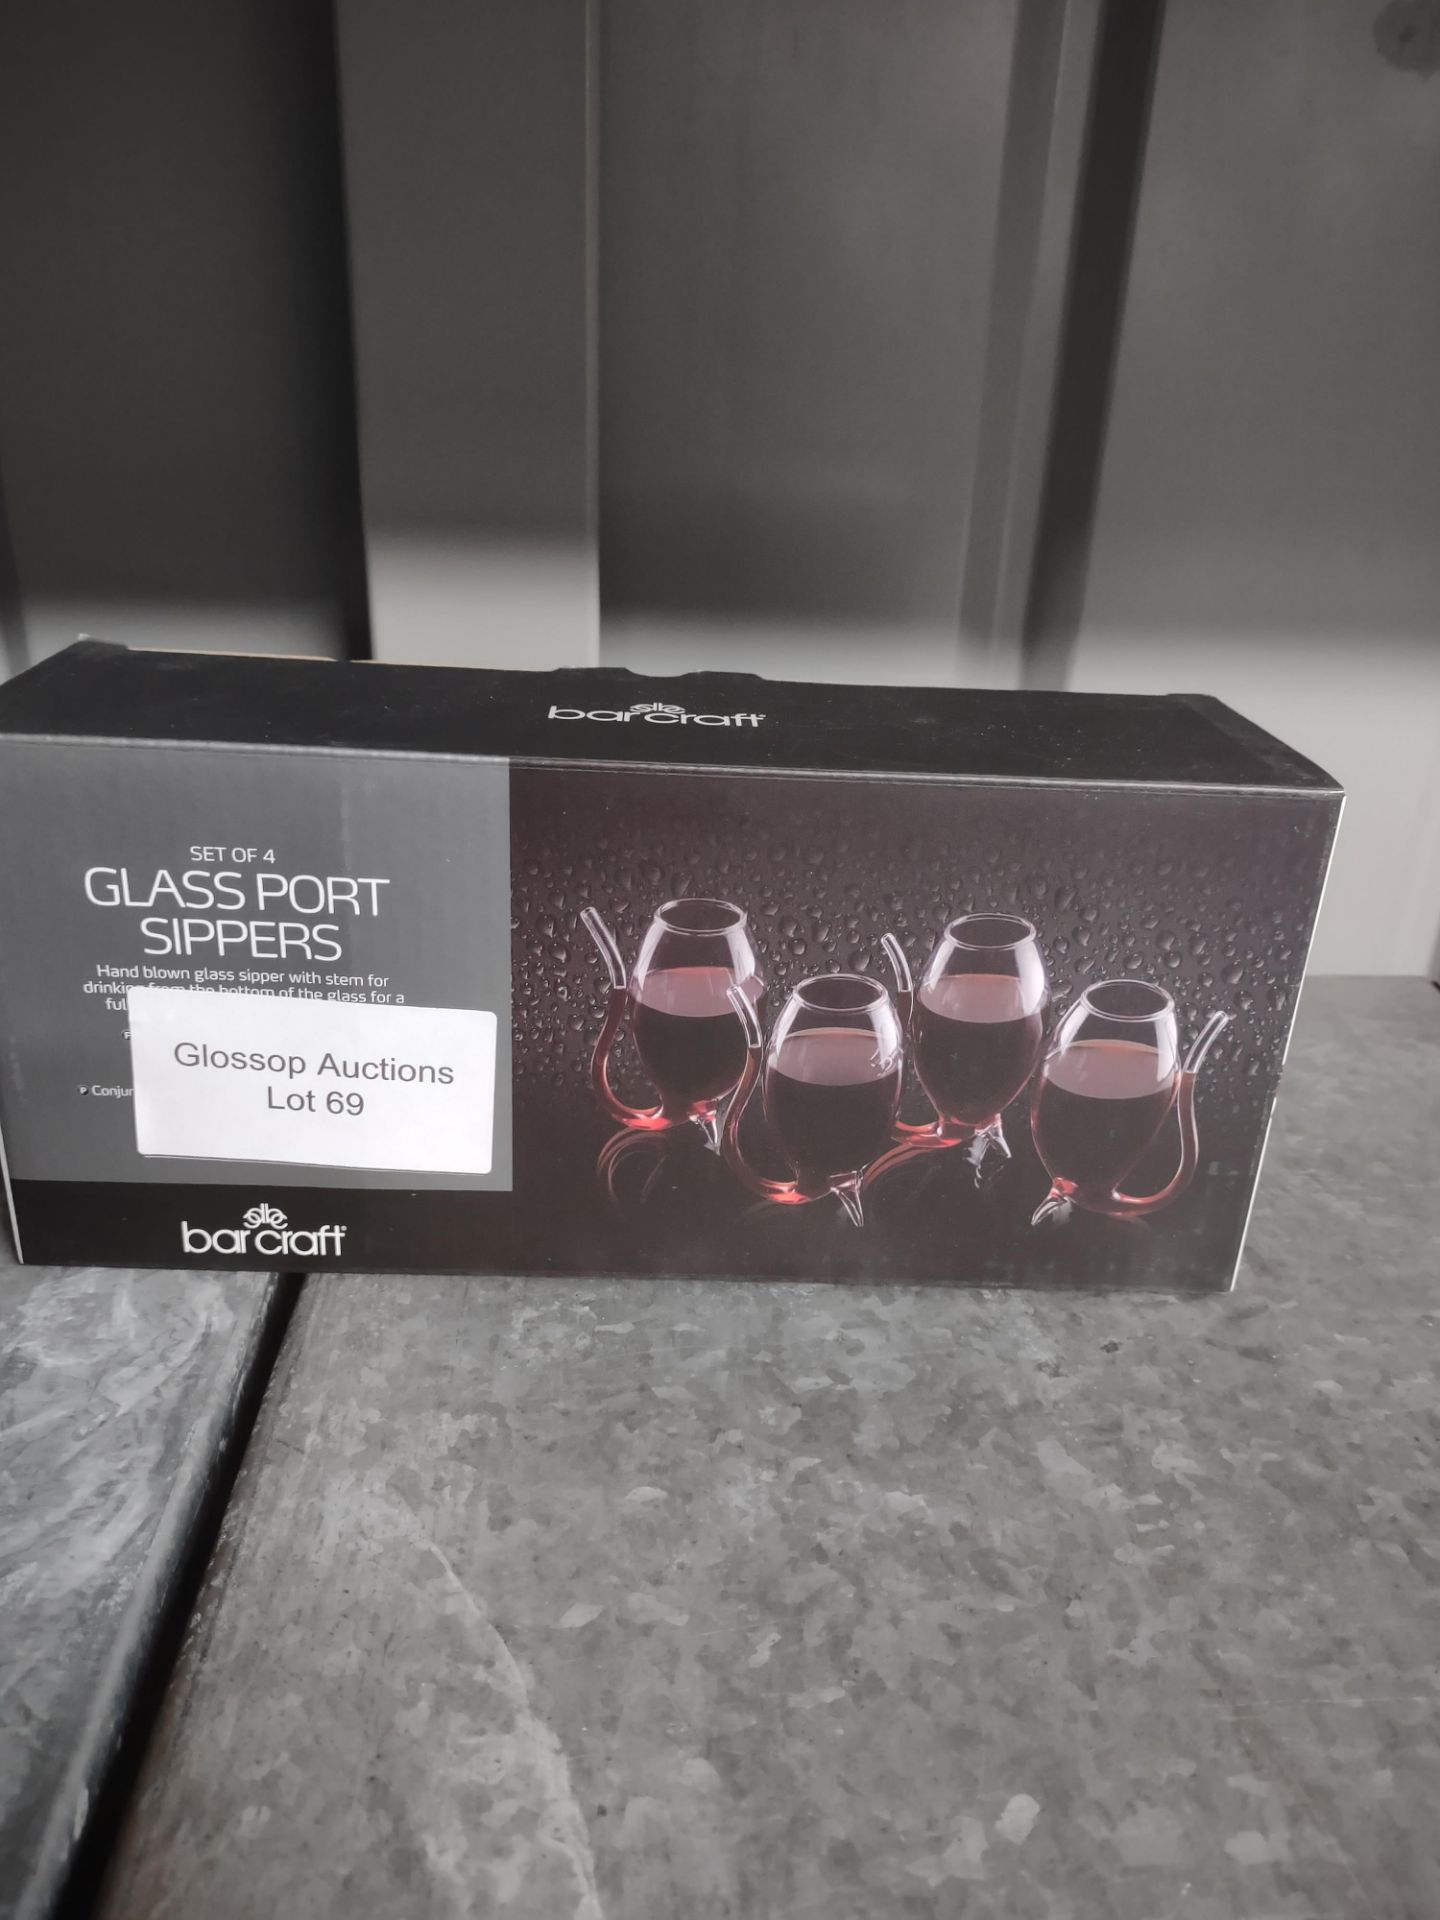 BarCraft BCPORT4PC Liqueur/Port Sippers in Gift Box, Glass, 90 ml, Set of 4. RRP £29.99 - Grade U